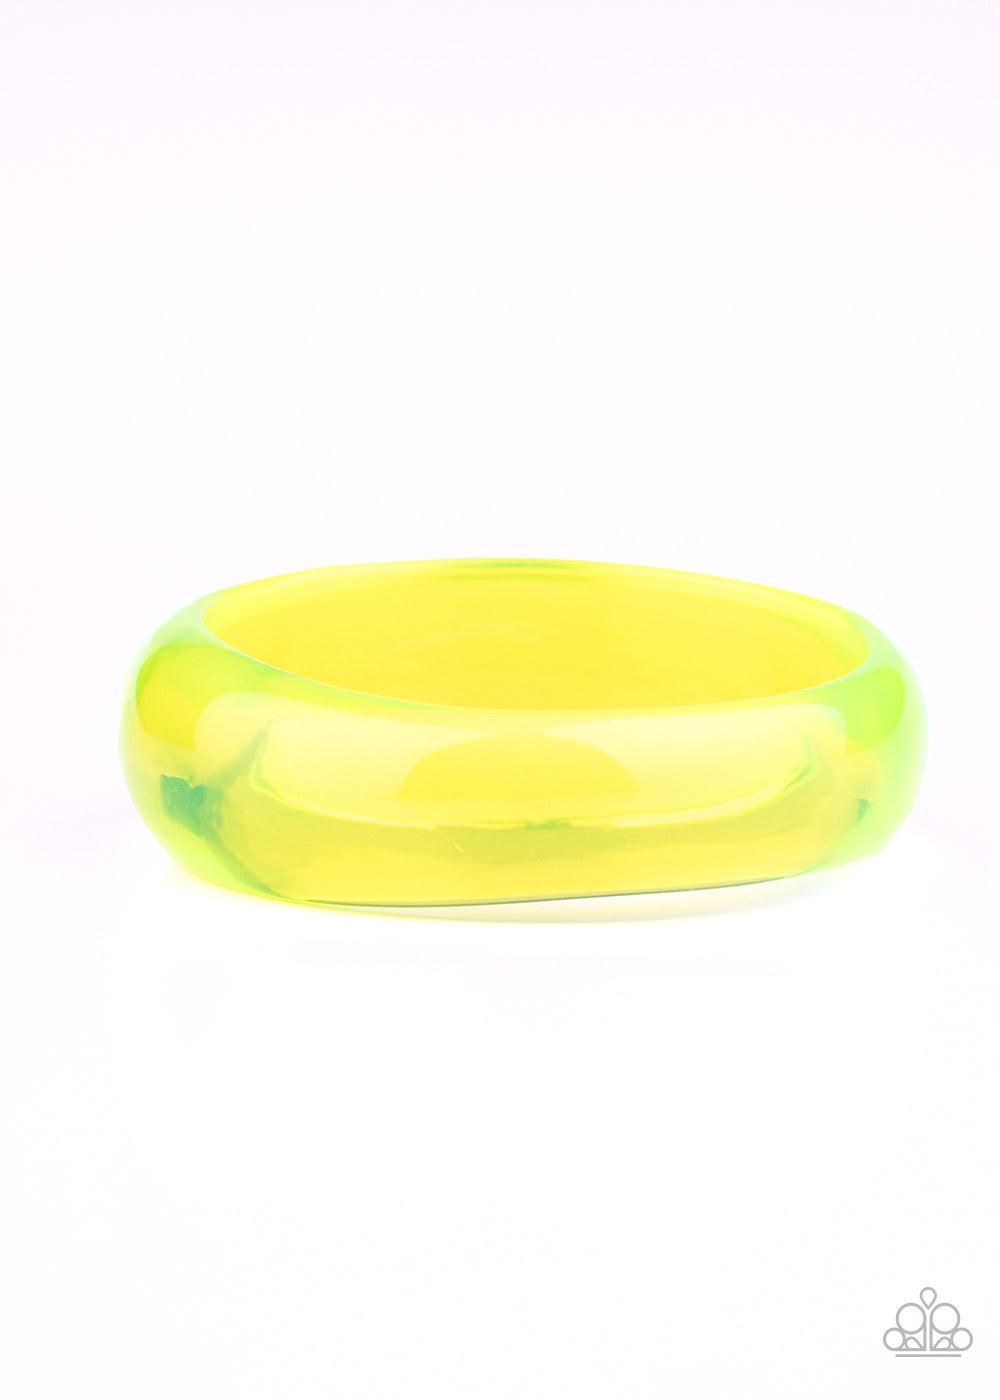 Paparazzi Accessories Major Material Girl - Yellow A neon yellow acrylic bangle slides along the wrist for a colorfully retro flair. The shiny bangle gradually widens at the top for a fabulous finish. Sold as one individual bracelet. Jewelry